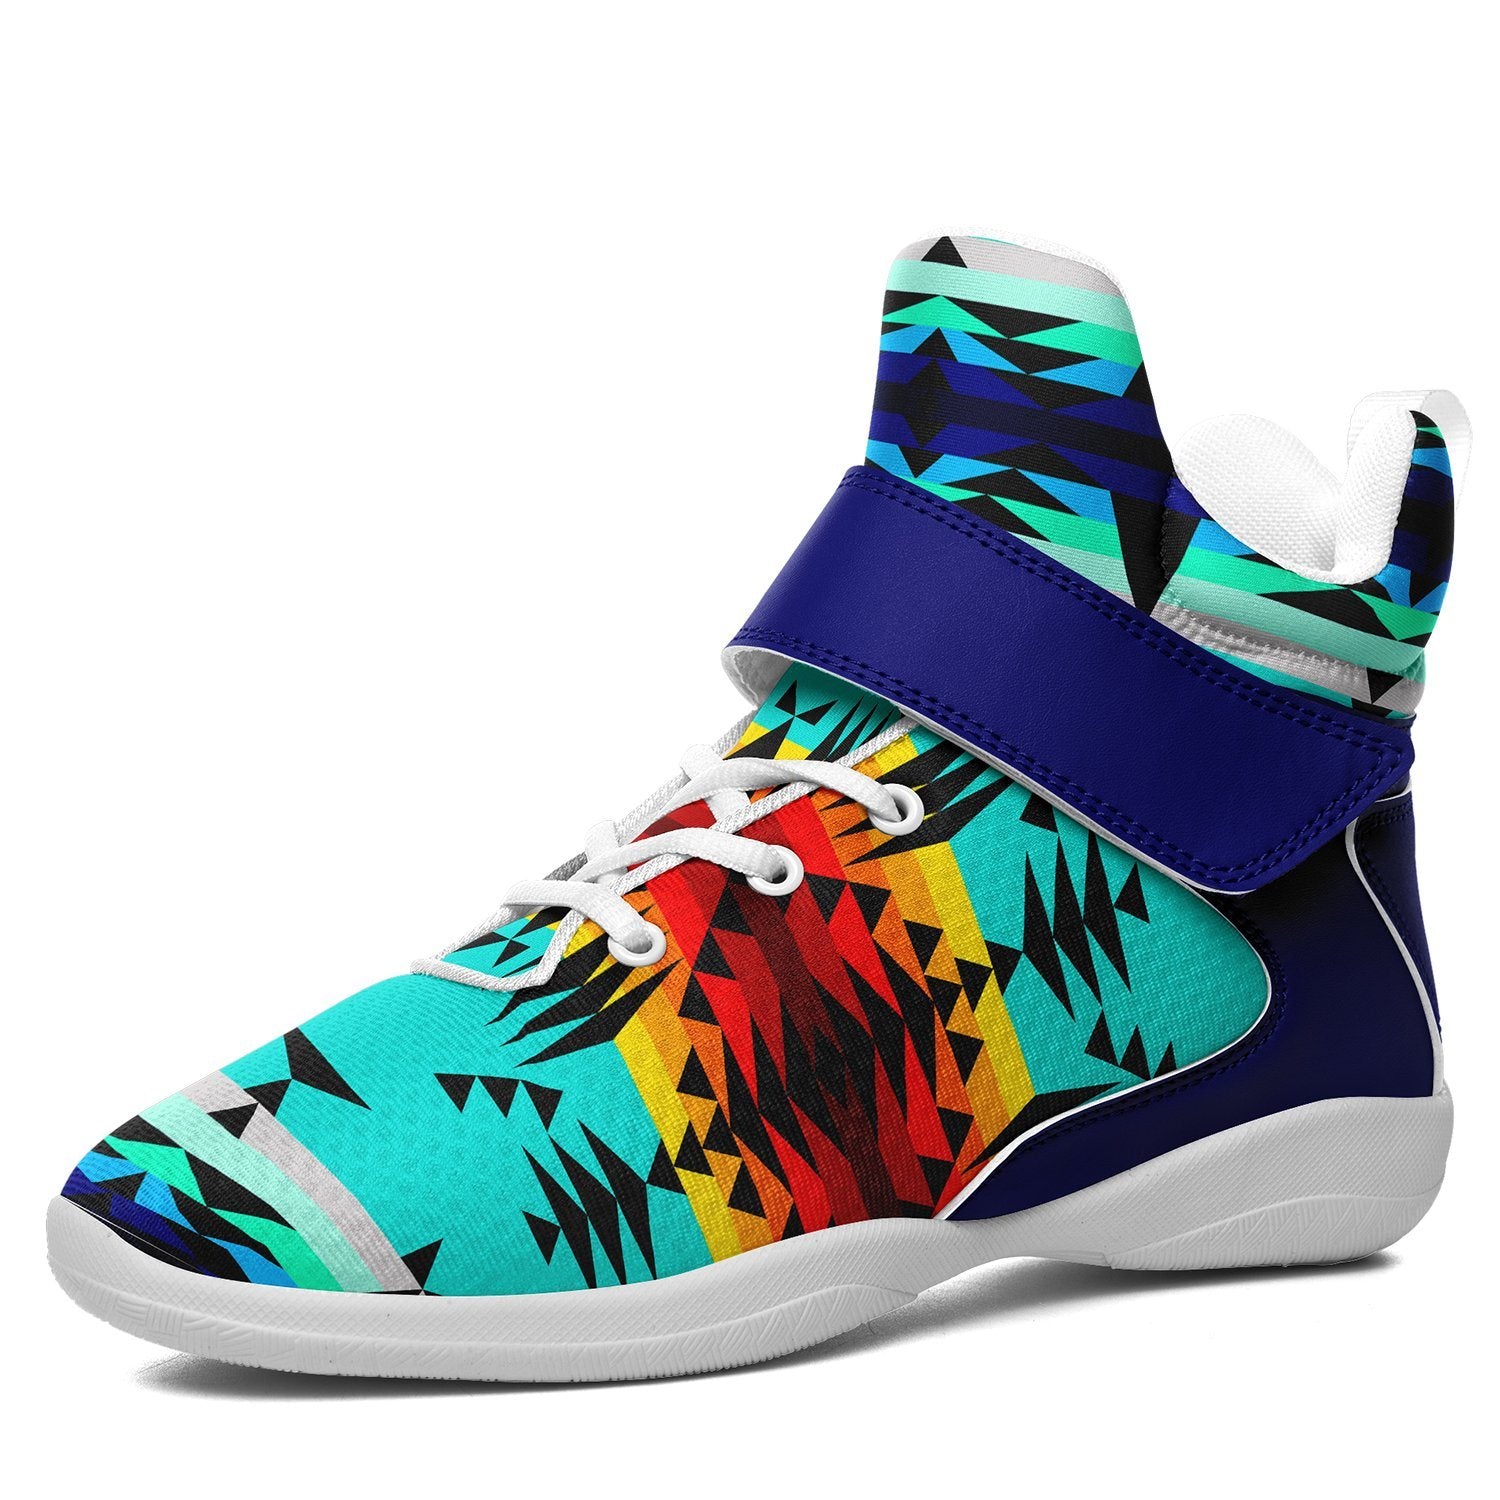 Between the Mountains Ipottaa Basketball / Sport High Top Shoes 49 Dzine US Women 4.5 / US Youth 3.5 / EUR 35 White Sole with Blue Strap 